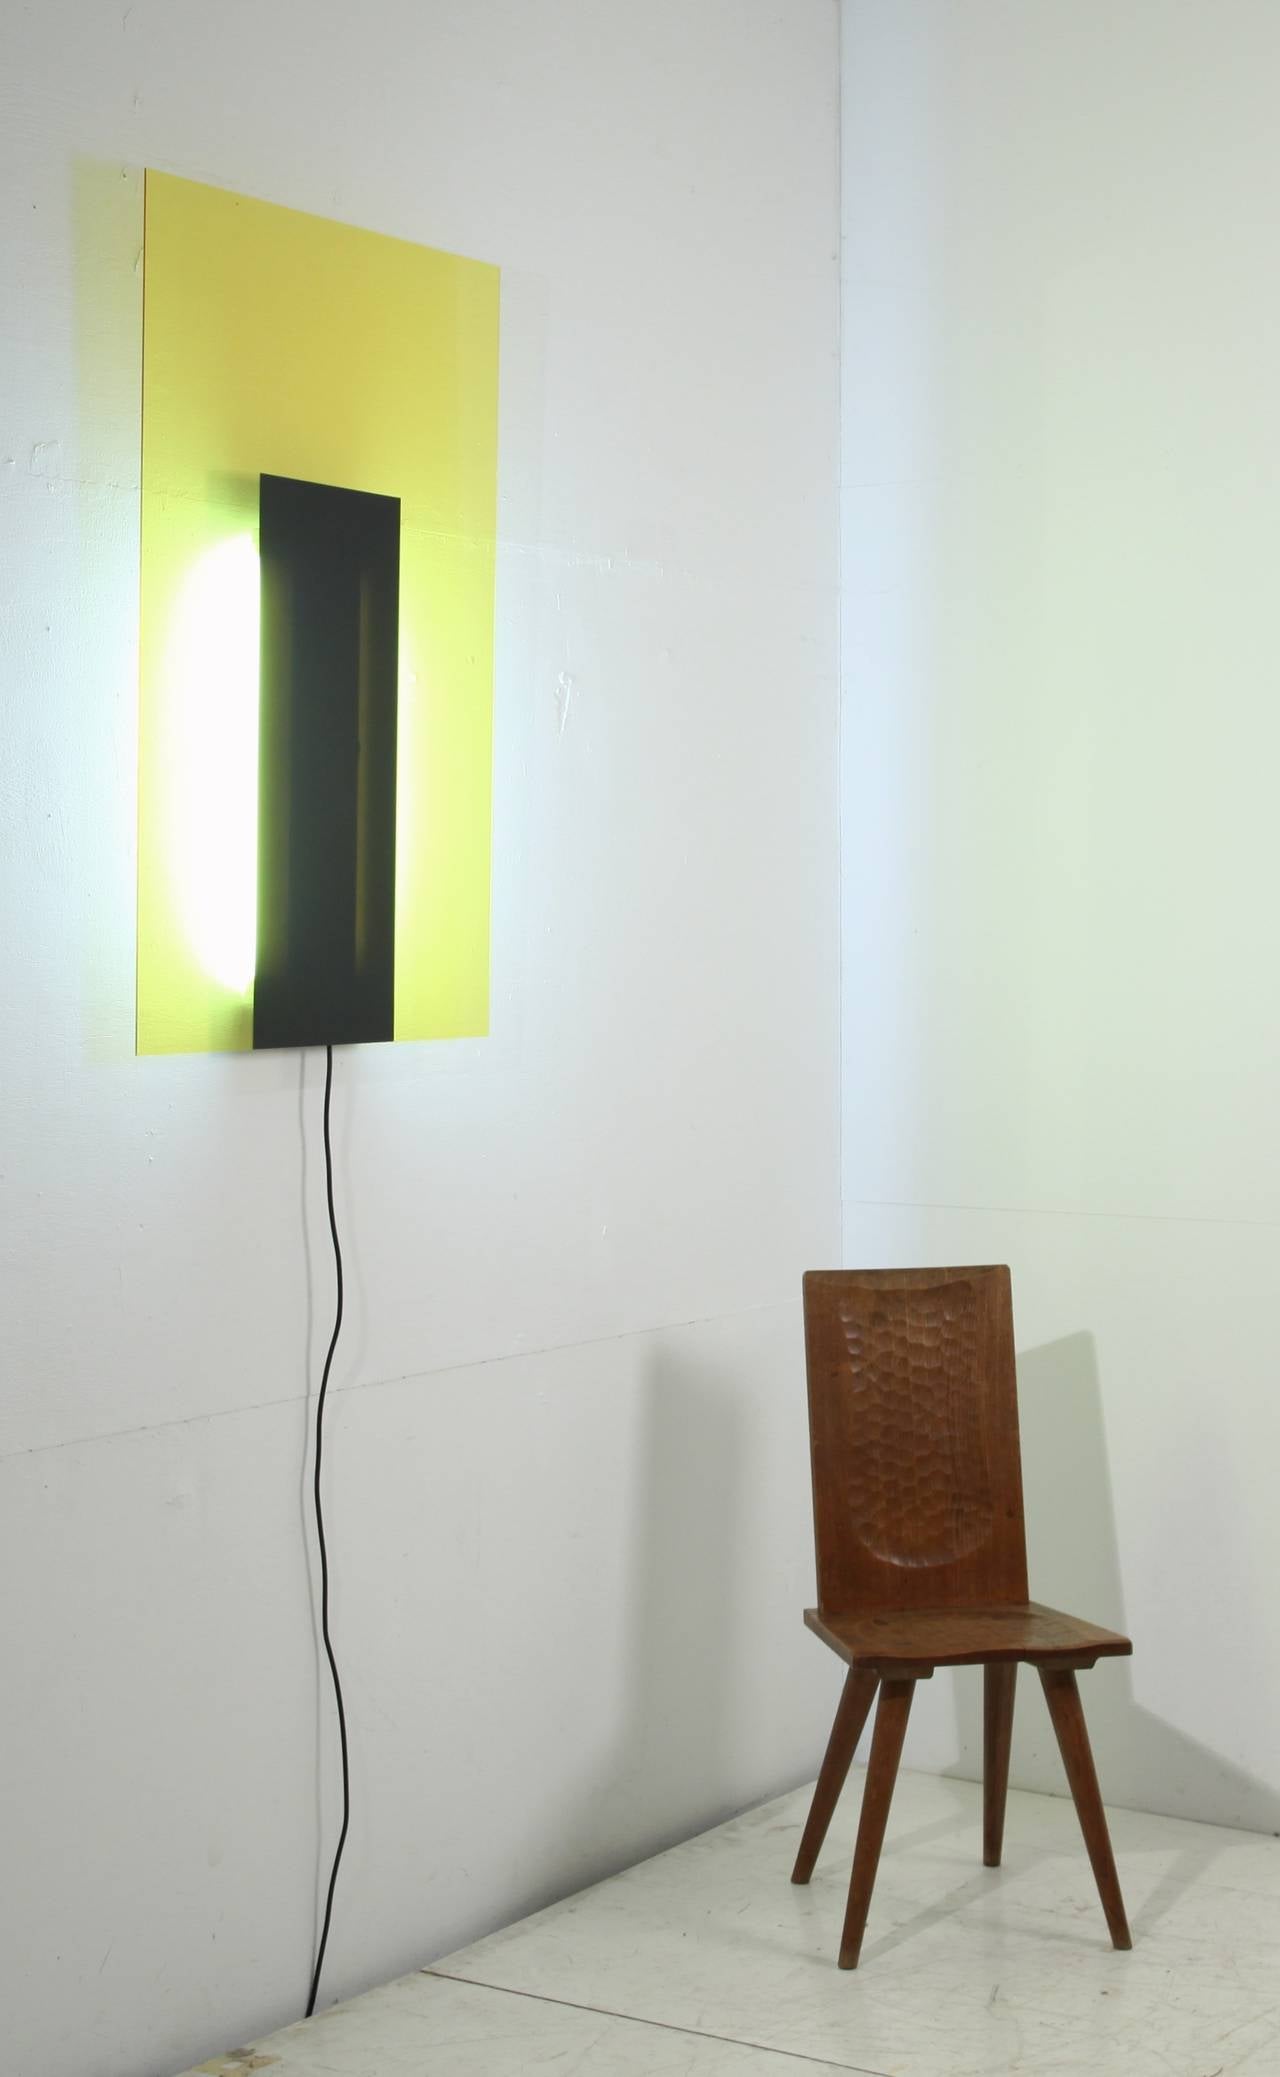 Meta Memhis wall light in yellow and black by Johanna Grawunder.

Johanna Grawunder is a designer and architect based in Milan and San Francisco.

Her work spans a broad range of projects and scales, from large-scale public installations,